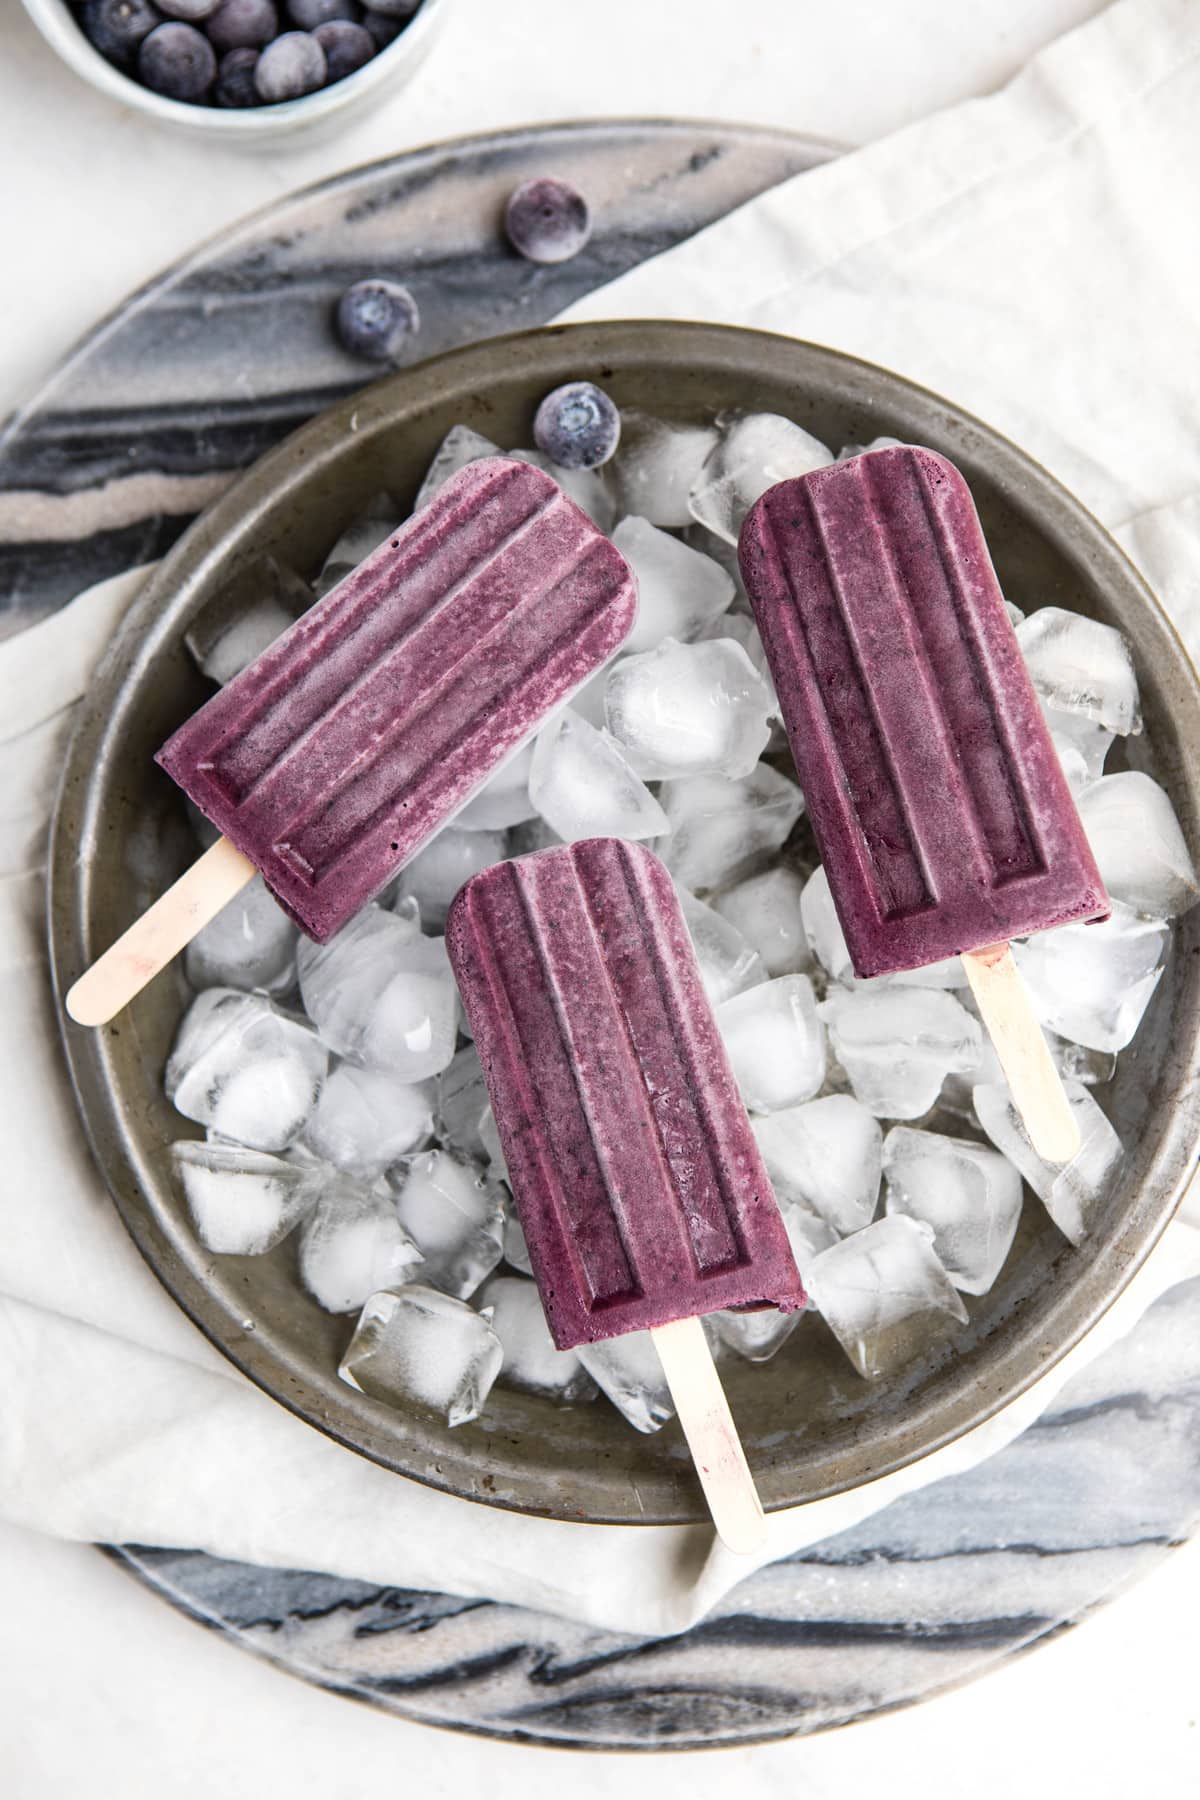 3 blueberry maqui popsicles on round tray of ice